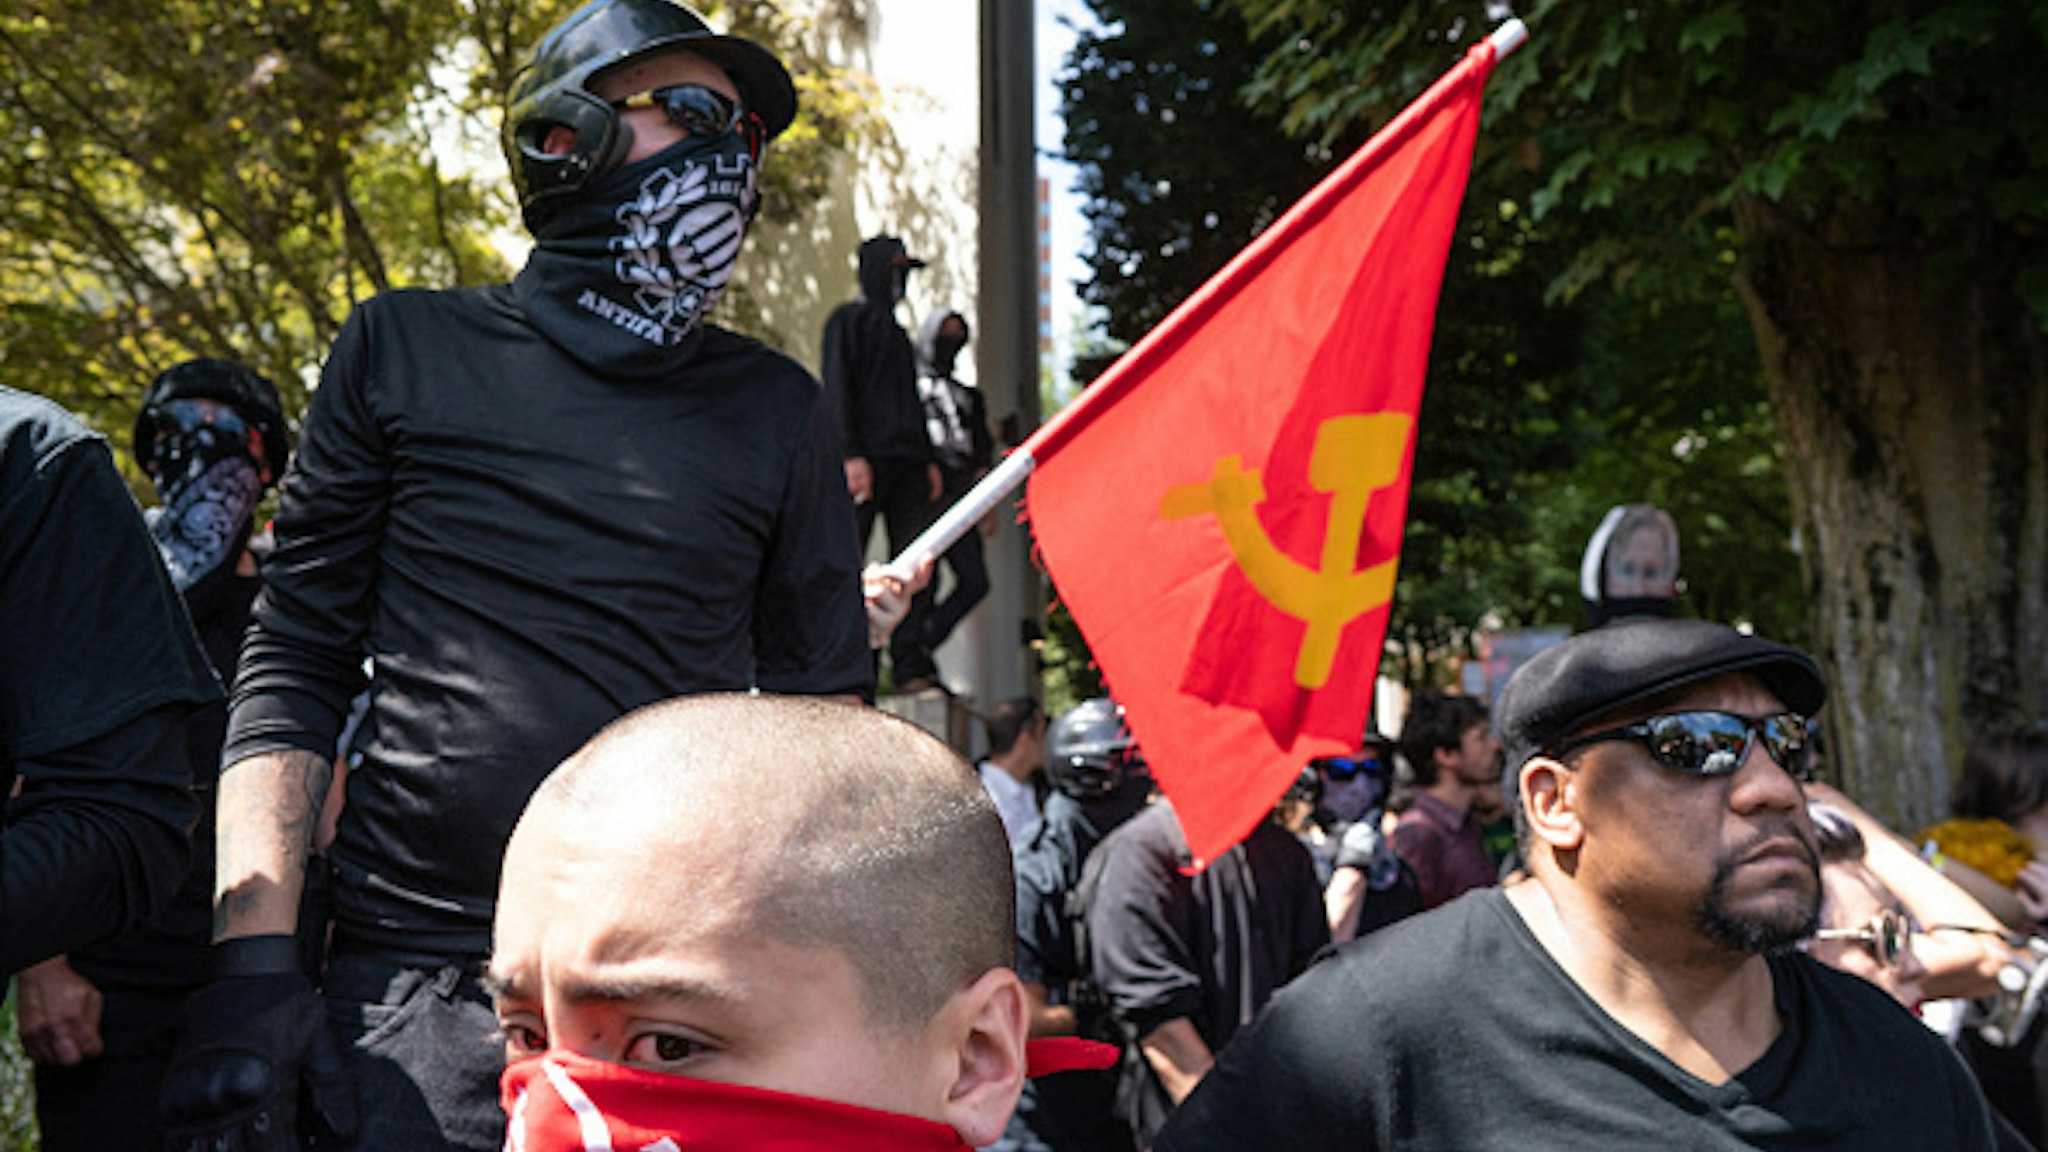 DOWNTOWN, PORTLAND, OREGON, UNITED STATES - 2018/08/04: Members of Antifa and other left-wing protesters watch far right protesters on the other side of the street during the Patriot Prayer Rally. The Proud Boys organized the Patriot Prayer Rally in Portland. The Proud Boys, a far right group supportive of President Donald Trump, used inflammatory language ahead of their rally, with some members promising violence. Counter-protesters led by Antifa confronted the participants of the Patriot Prayer Rally and clashed with police, leading to arrests and injuries.